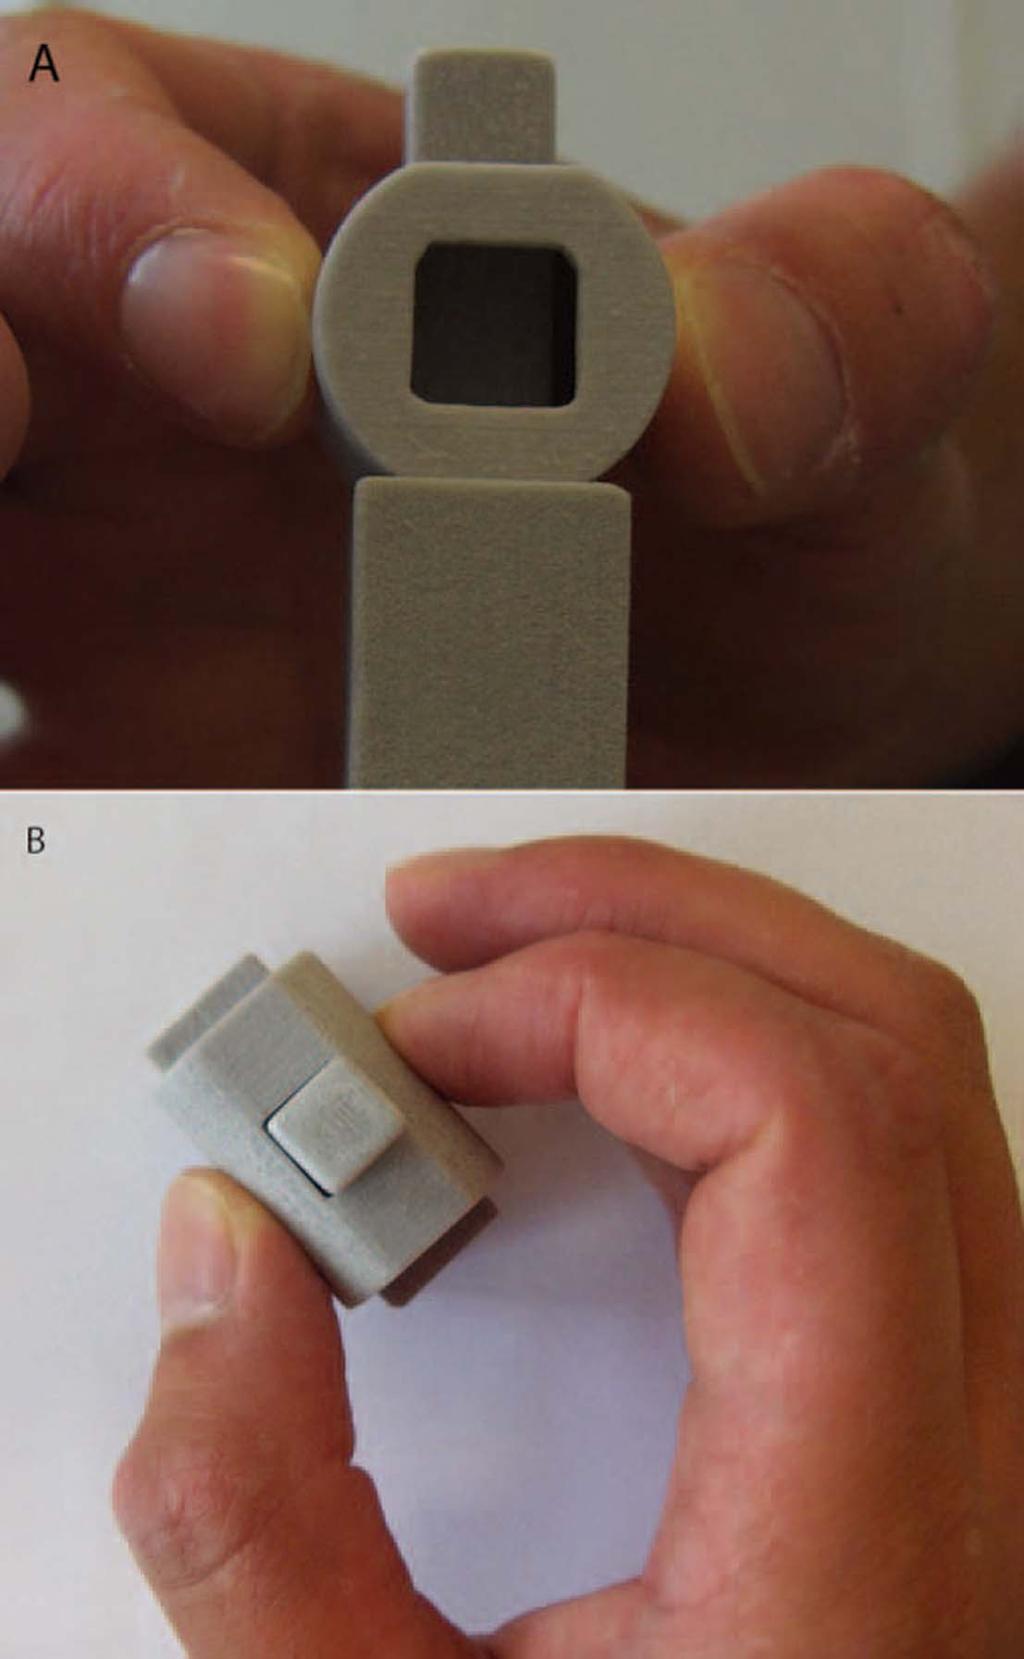 All stimuli had a square hole in order to put them on a stand. This ensured that the stimuli were fixed in place, but could be switched easily. All different stimuli can be seen in Figure 4.